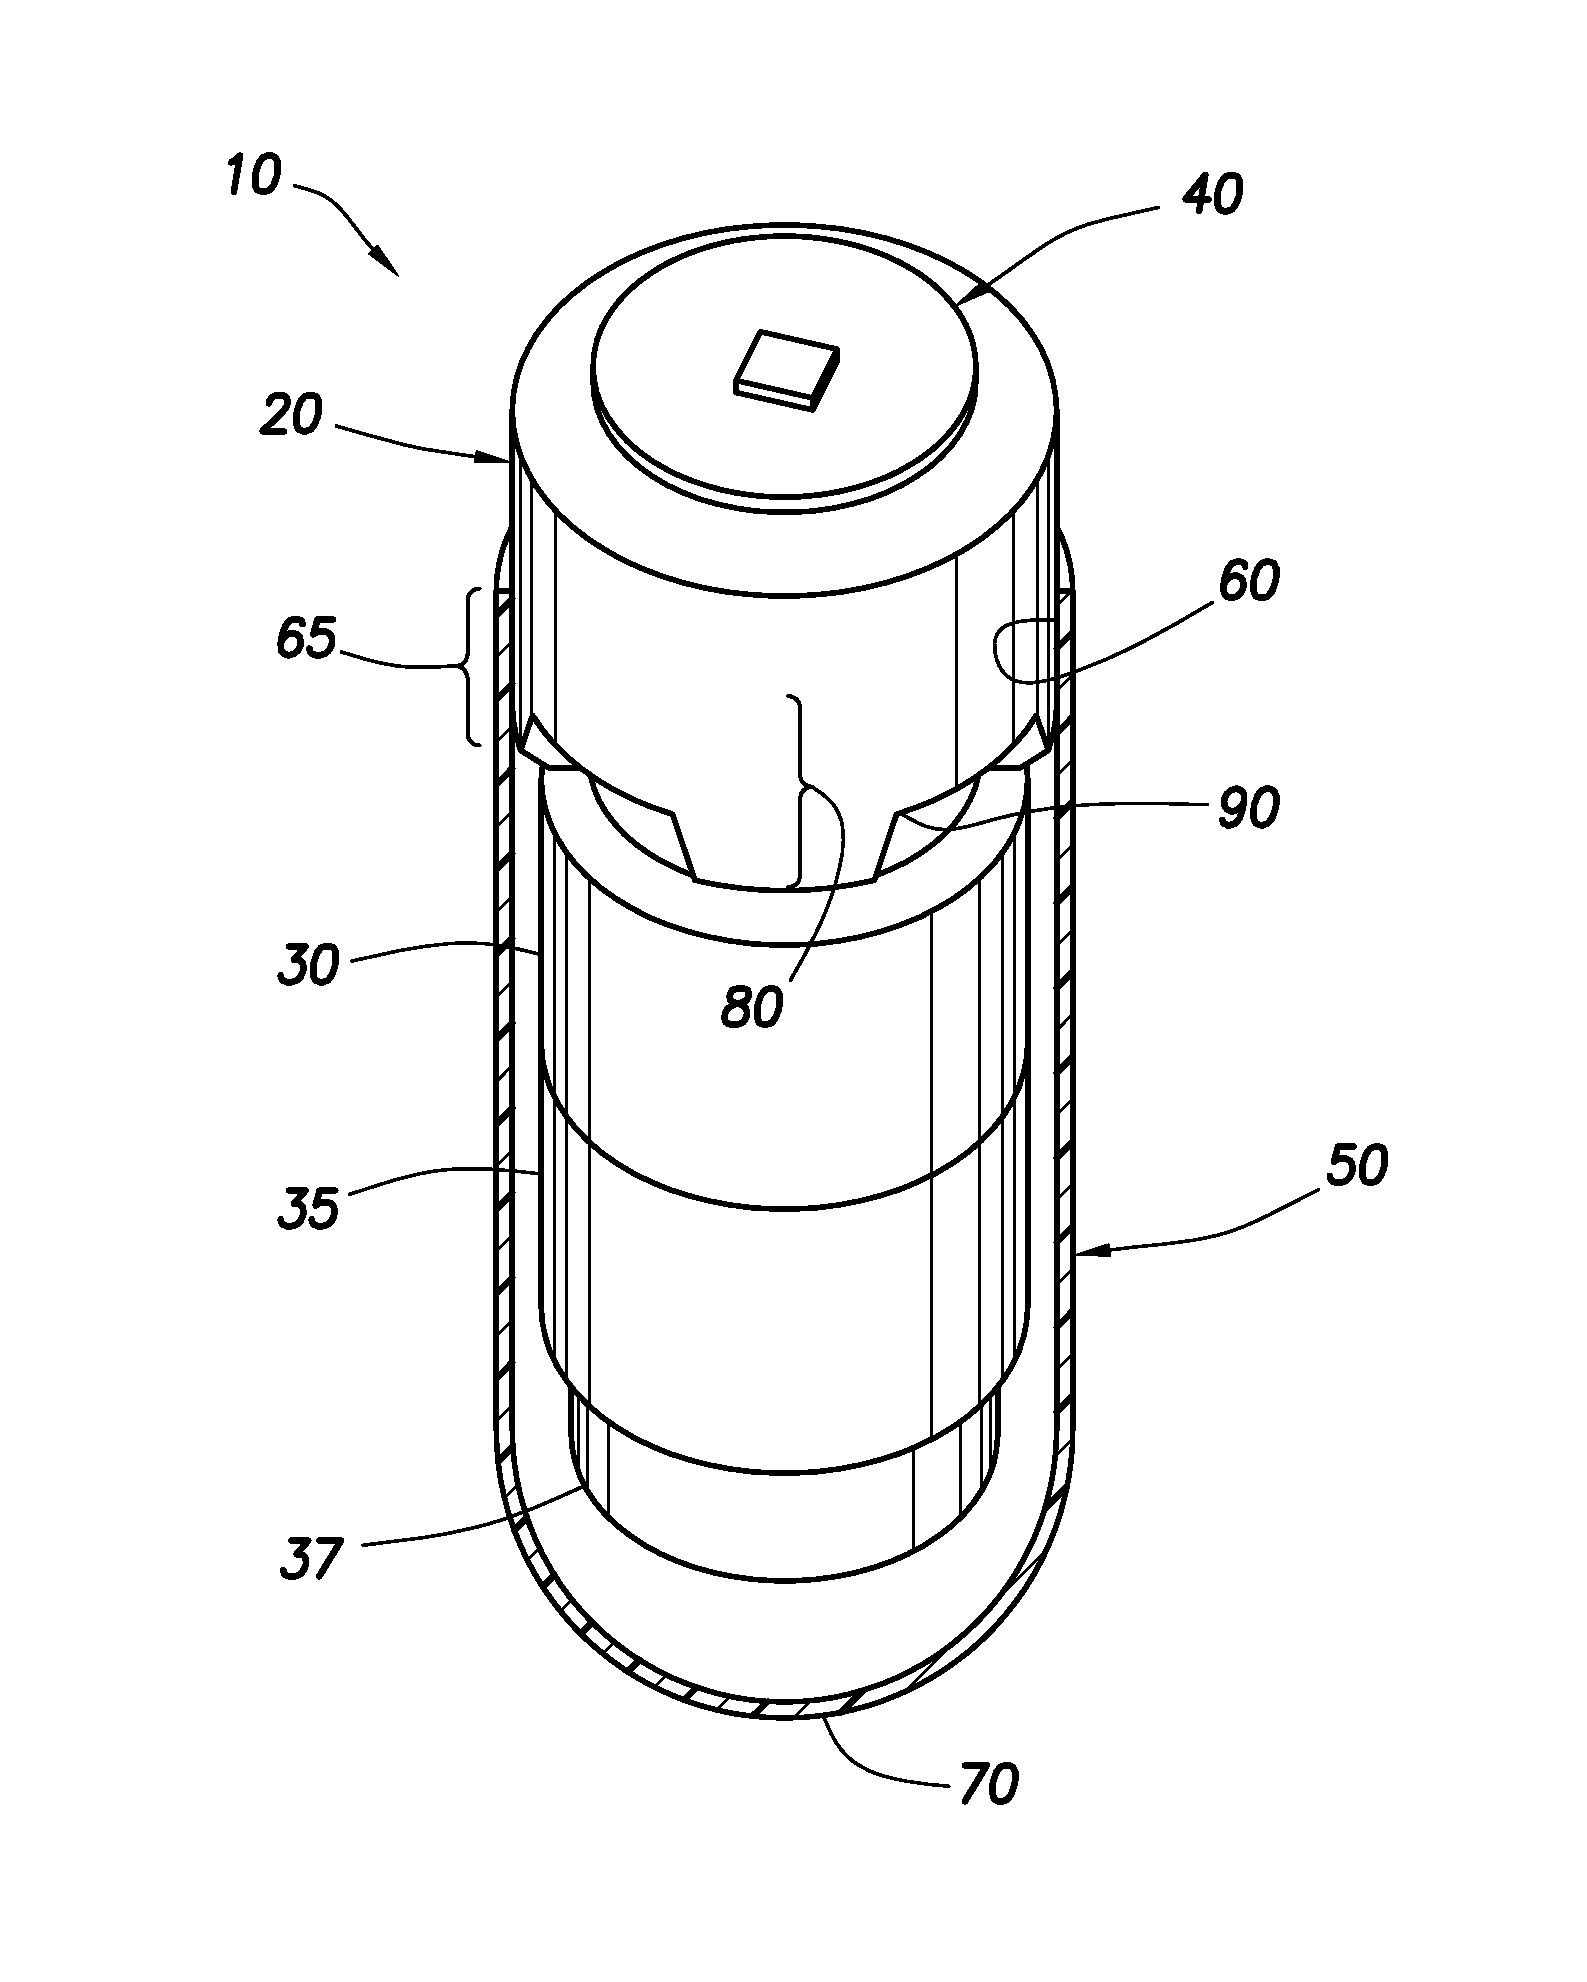 Pharmaceutical dosages delivery system